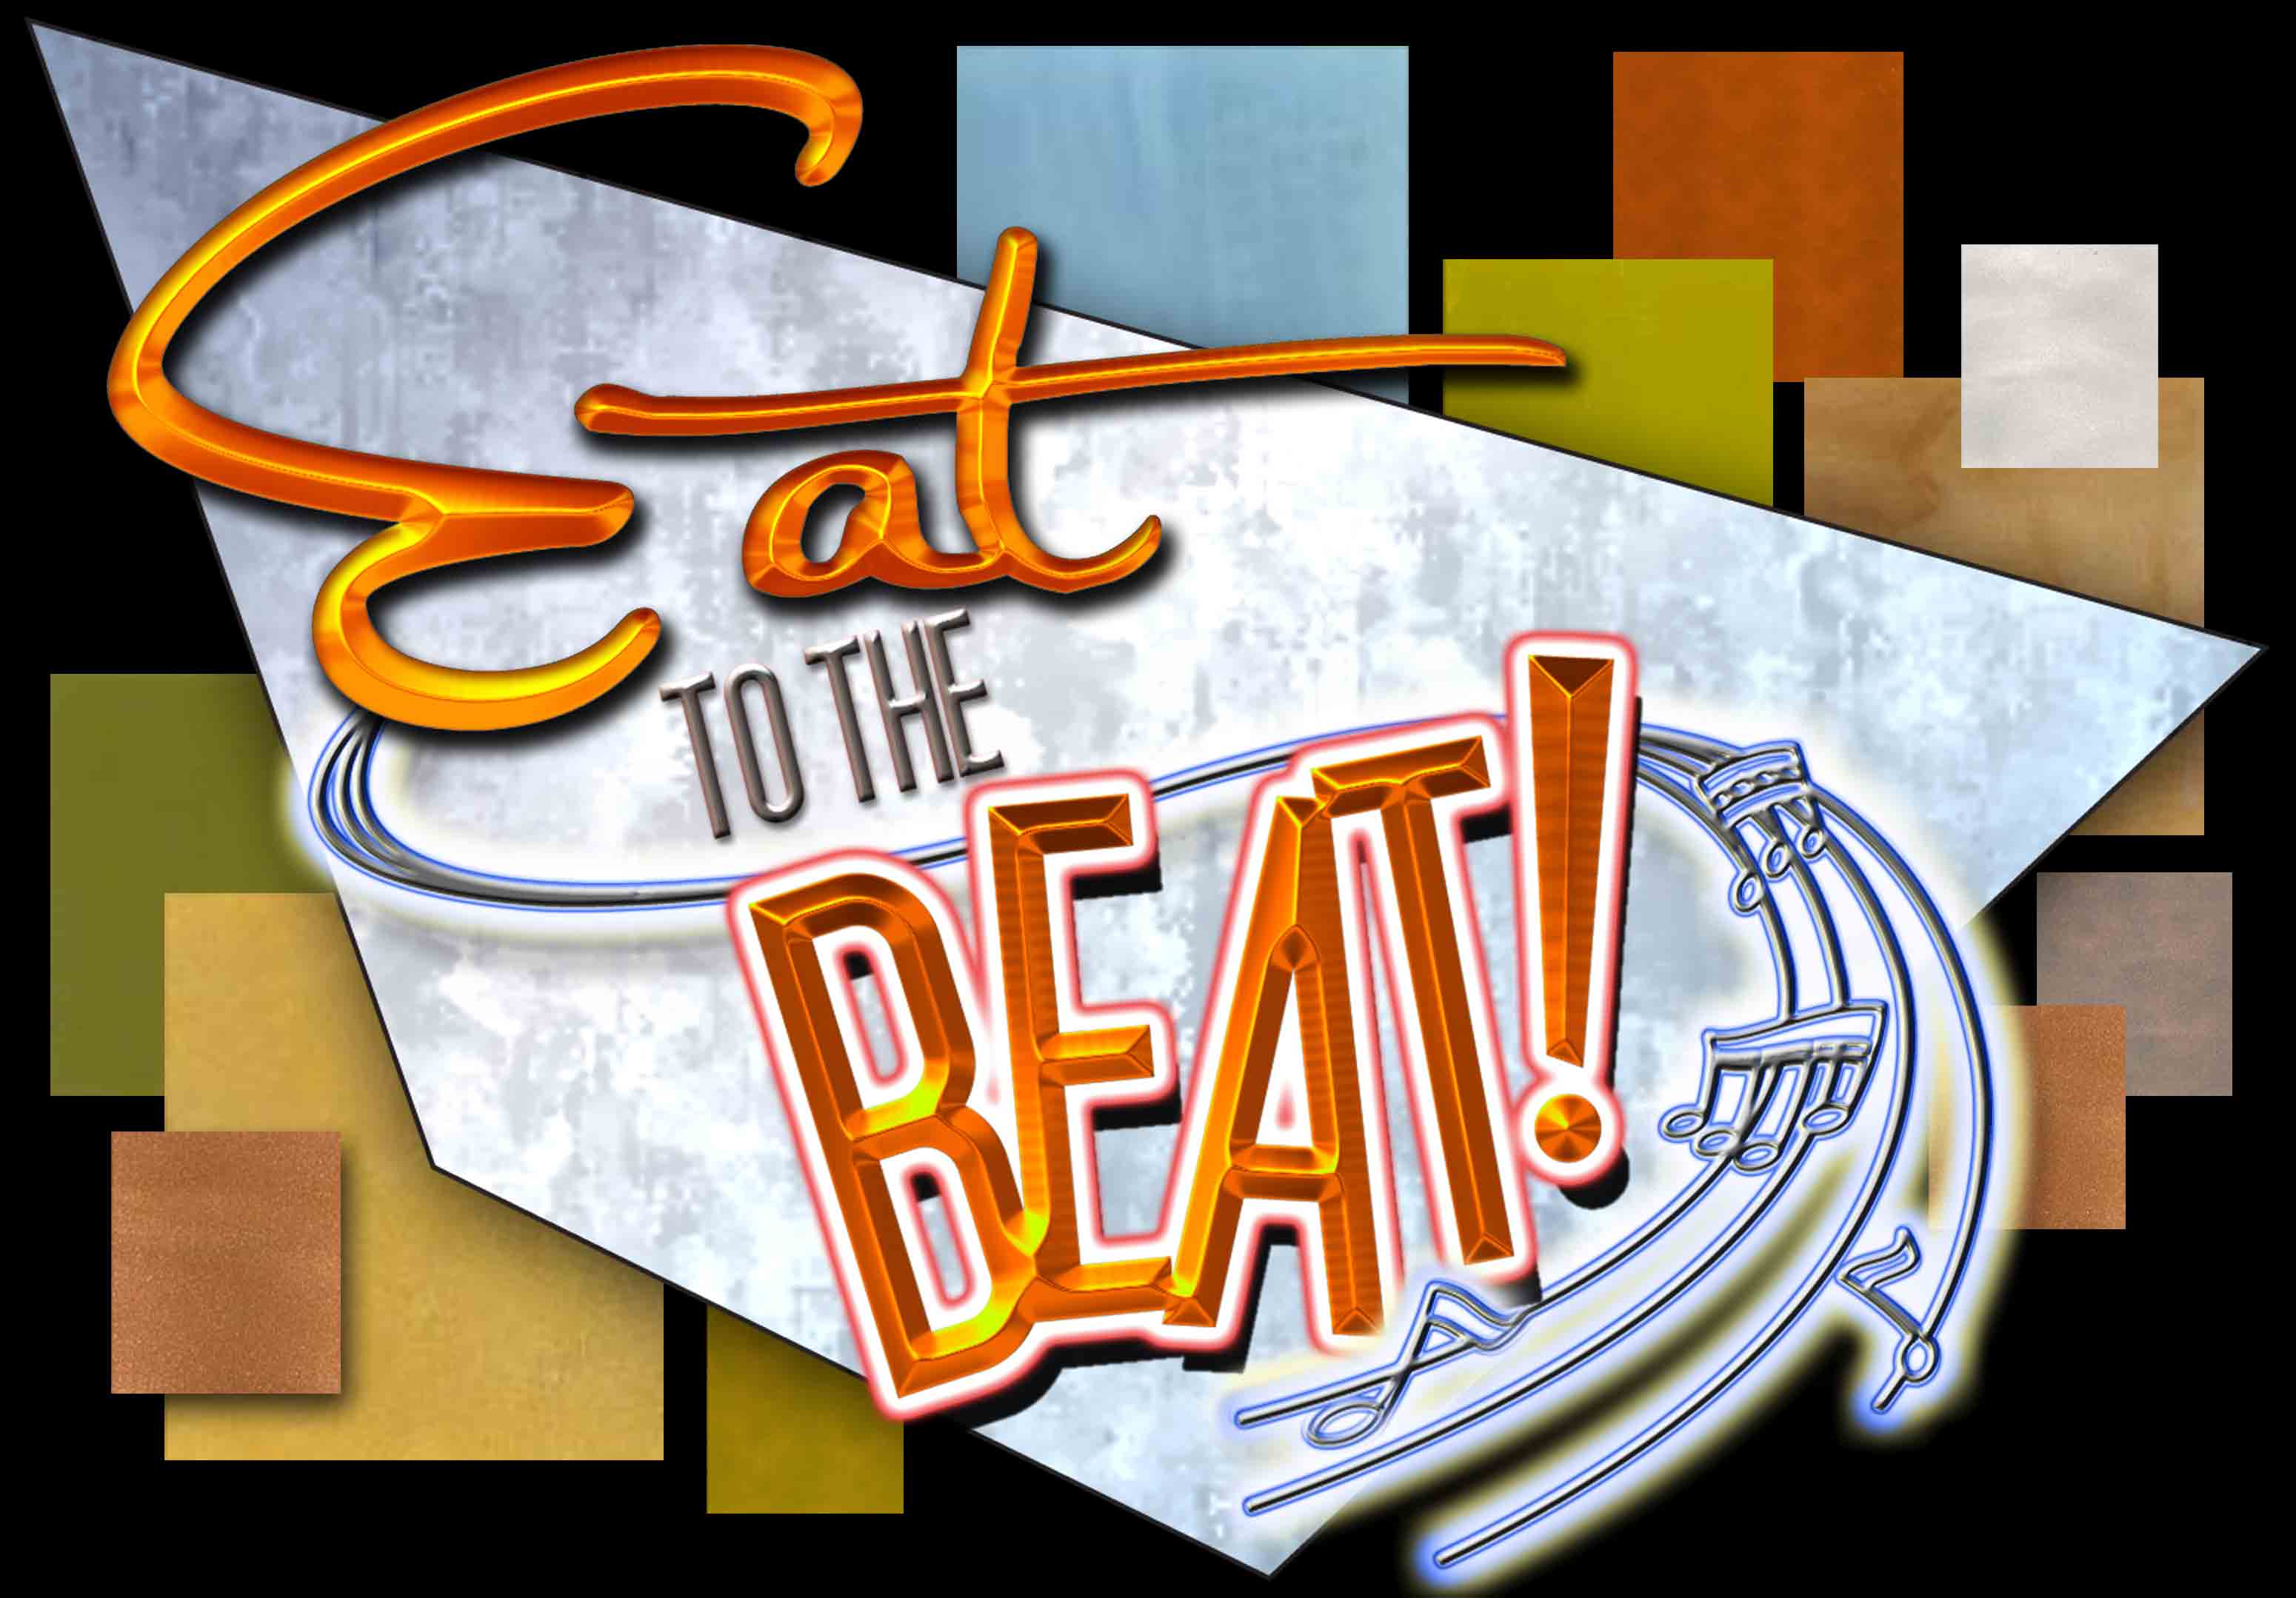 Four new acts join the "Eat to the Beat" Concert Series during Epcot's